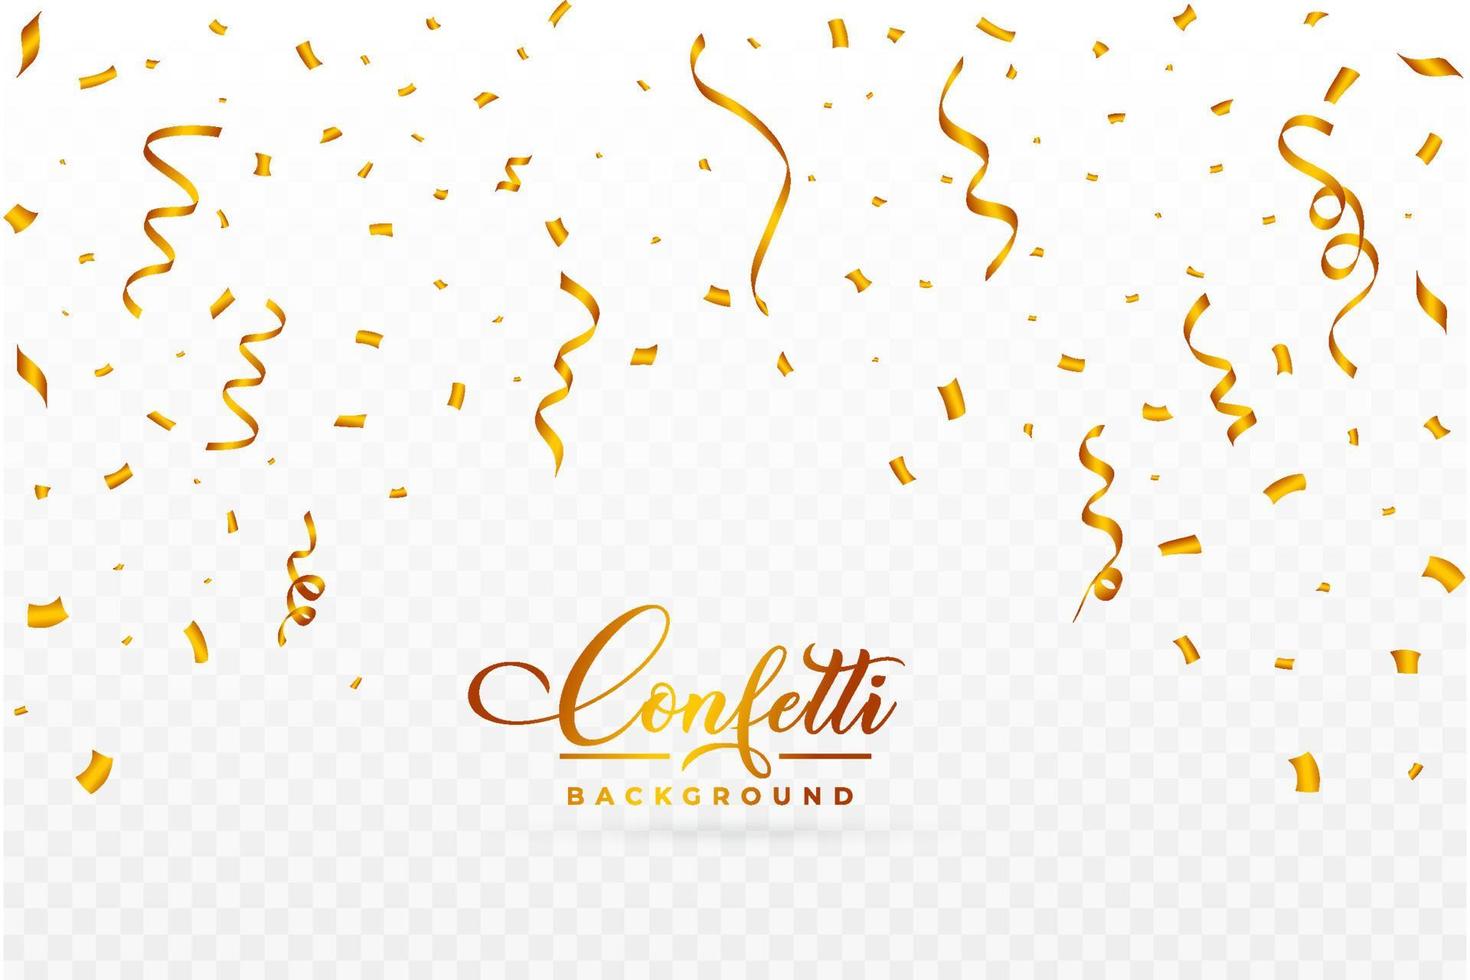 Confetti vector for the carnival background. Golden party ribbon and confetti falling. Golden confetti isolated on transparent background. Festival elements. Birthday party celebration.